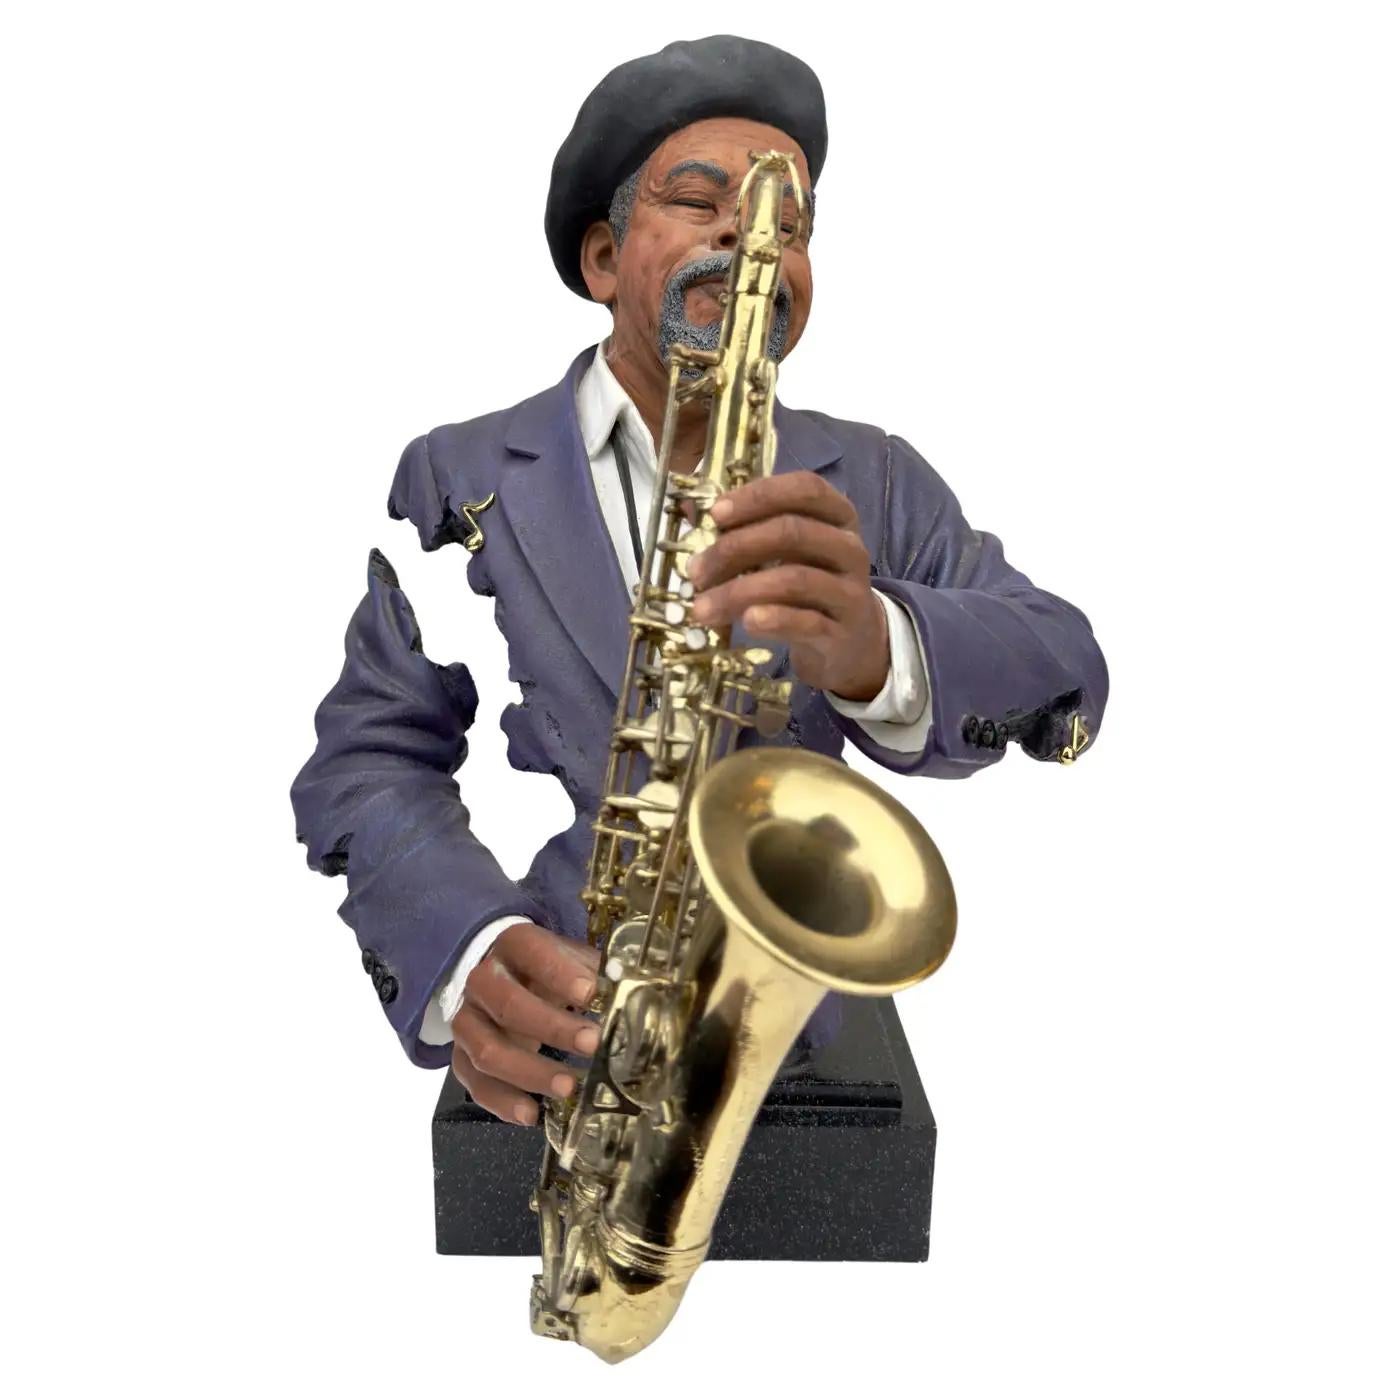 Willitts Designs International  Figurative Sculpture - Willitts Designs "Sax Appeal" Musician Cast Resin Sculpture, Signed & Numbered 